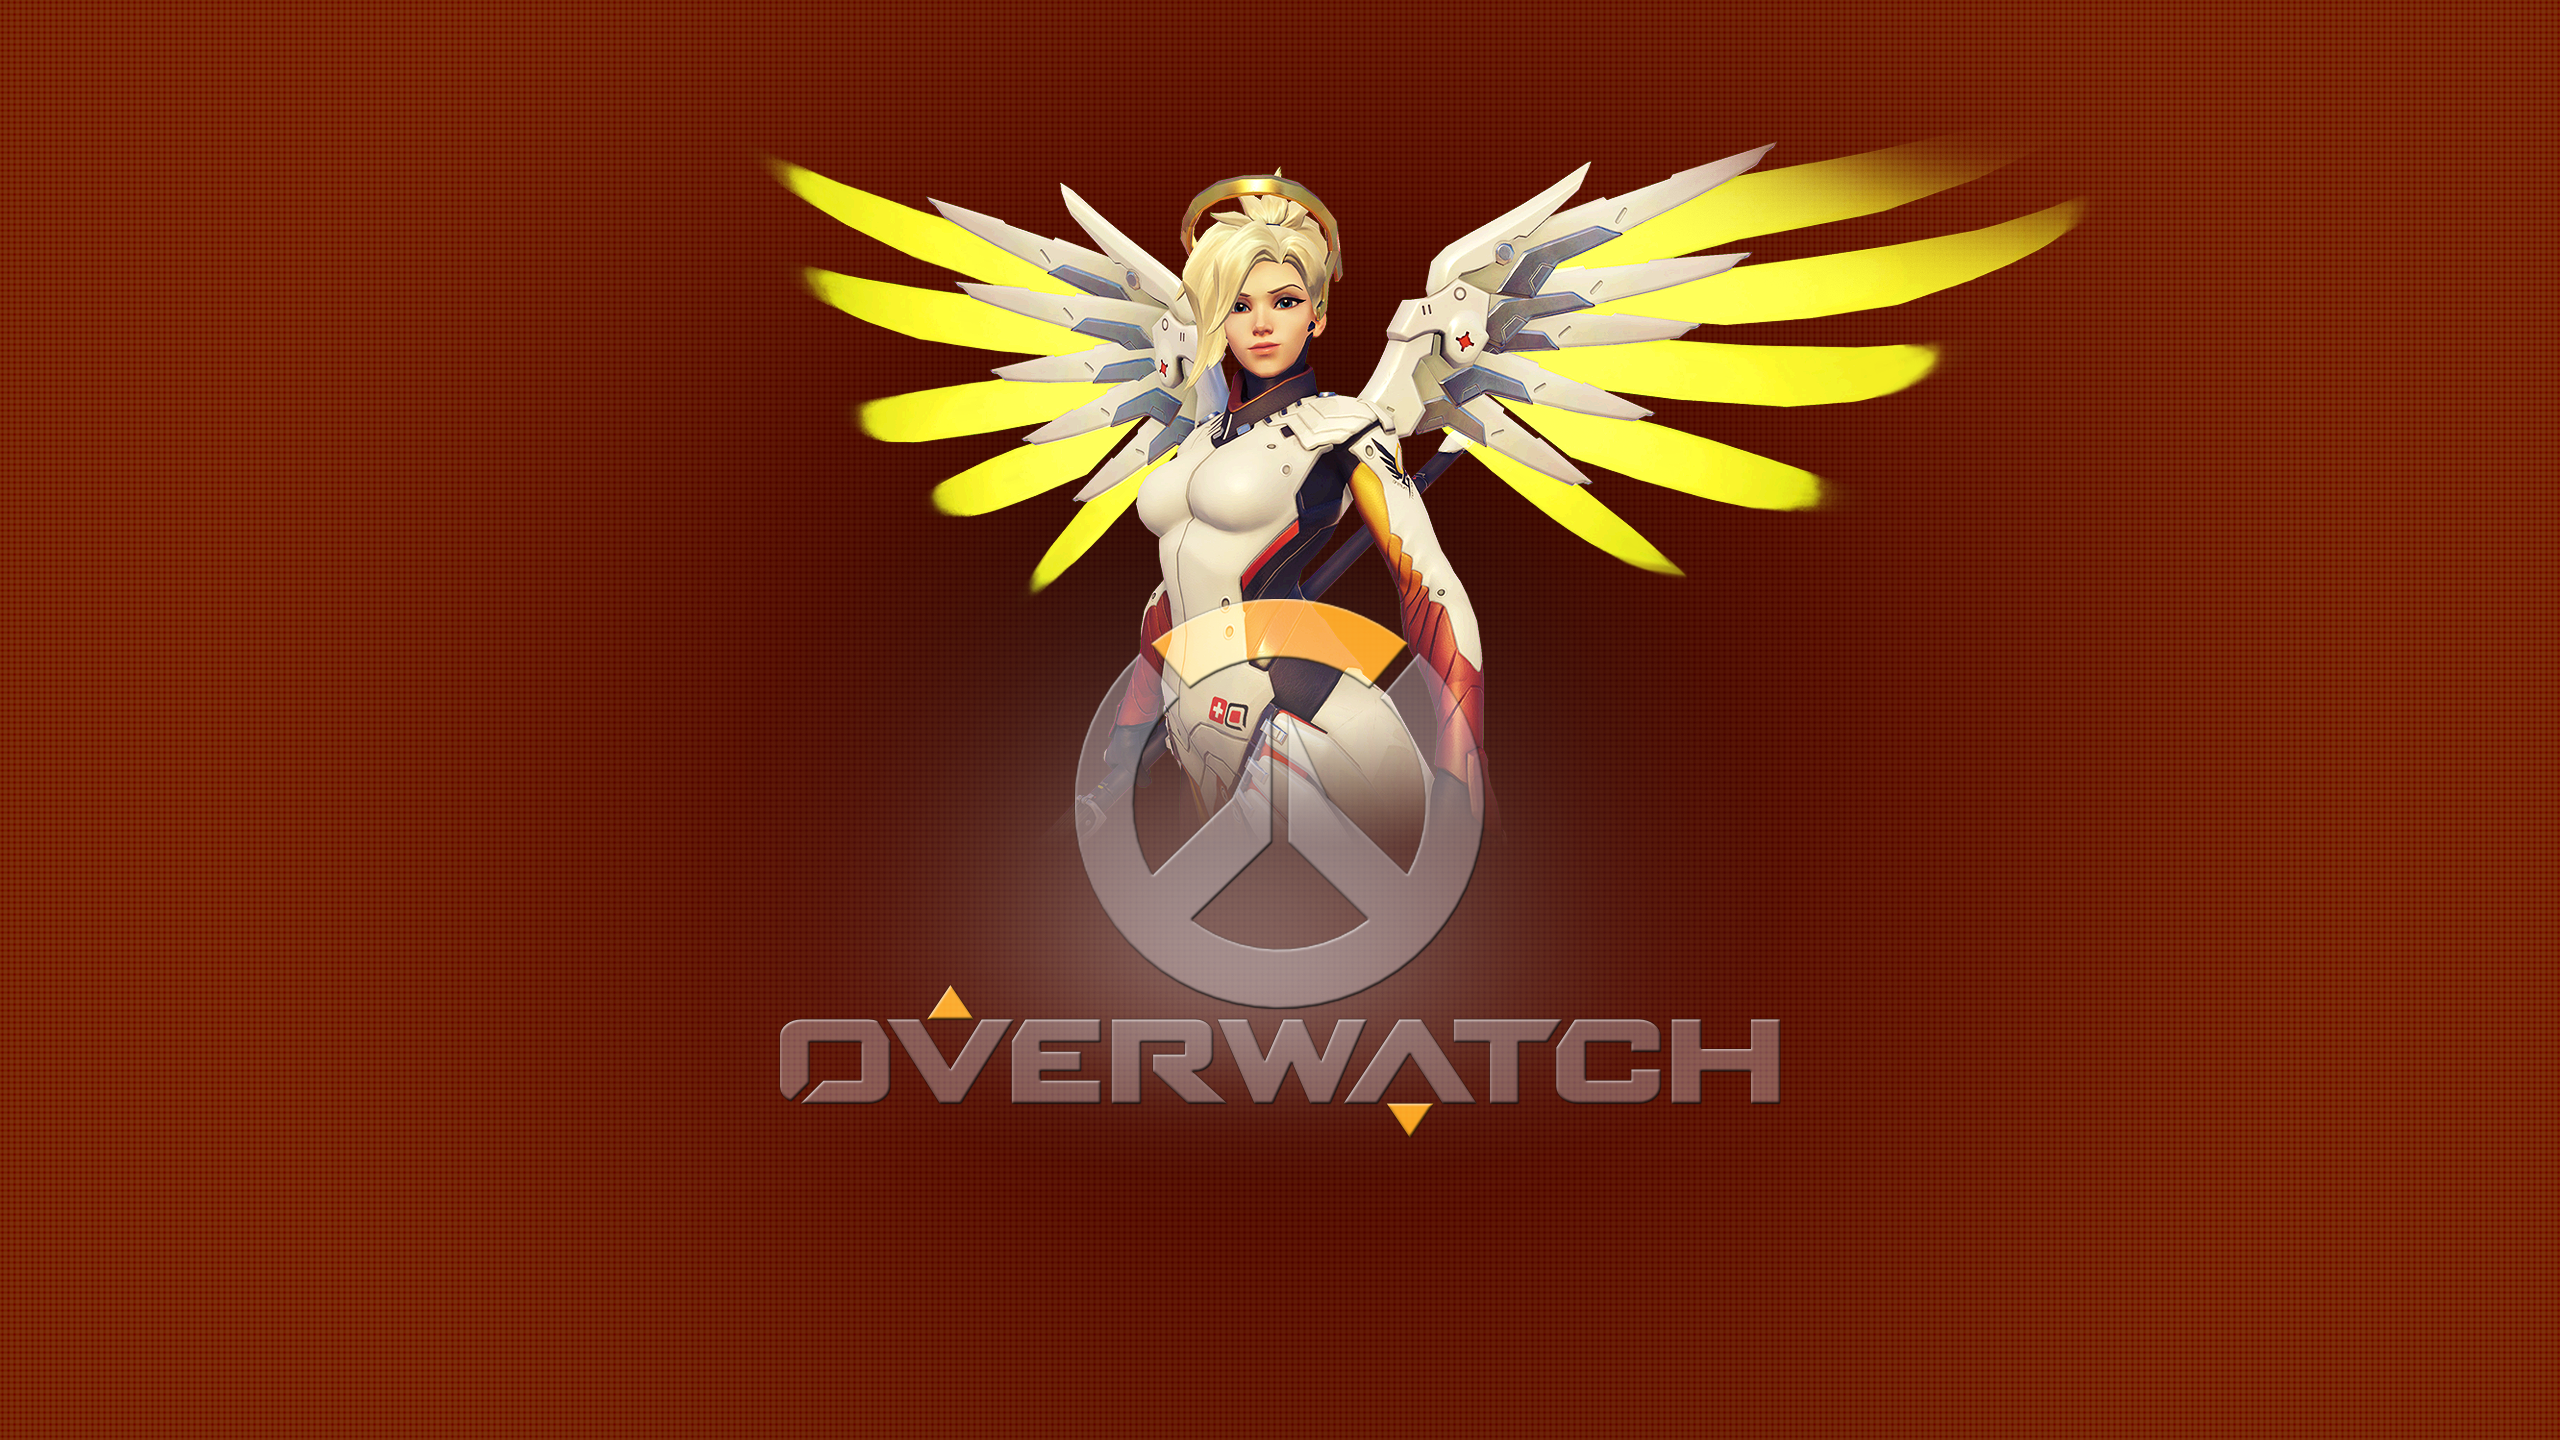 General 2560x1440 Blizzard Entertainment Overwatch video games PT-Desu (Author) Mercy (Overwatch) PC gaming red background simple background boobs logo video game art video game girls